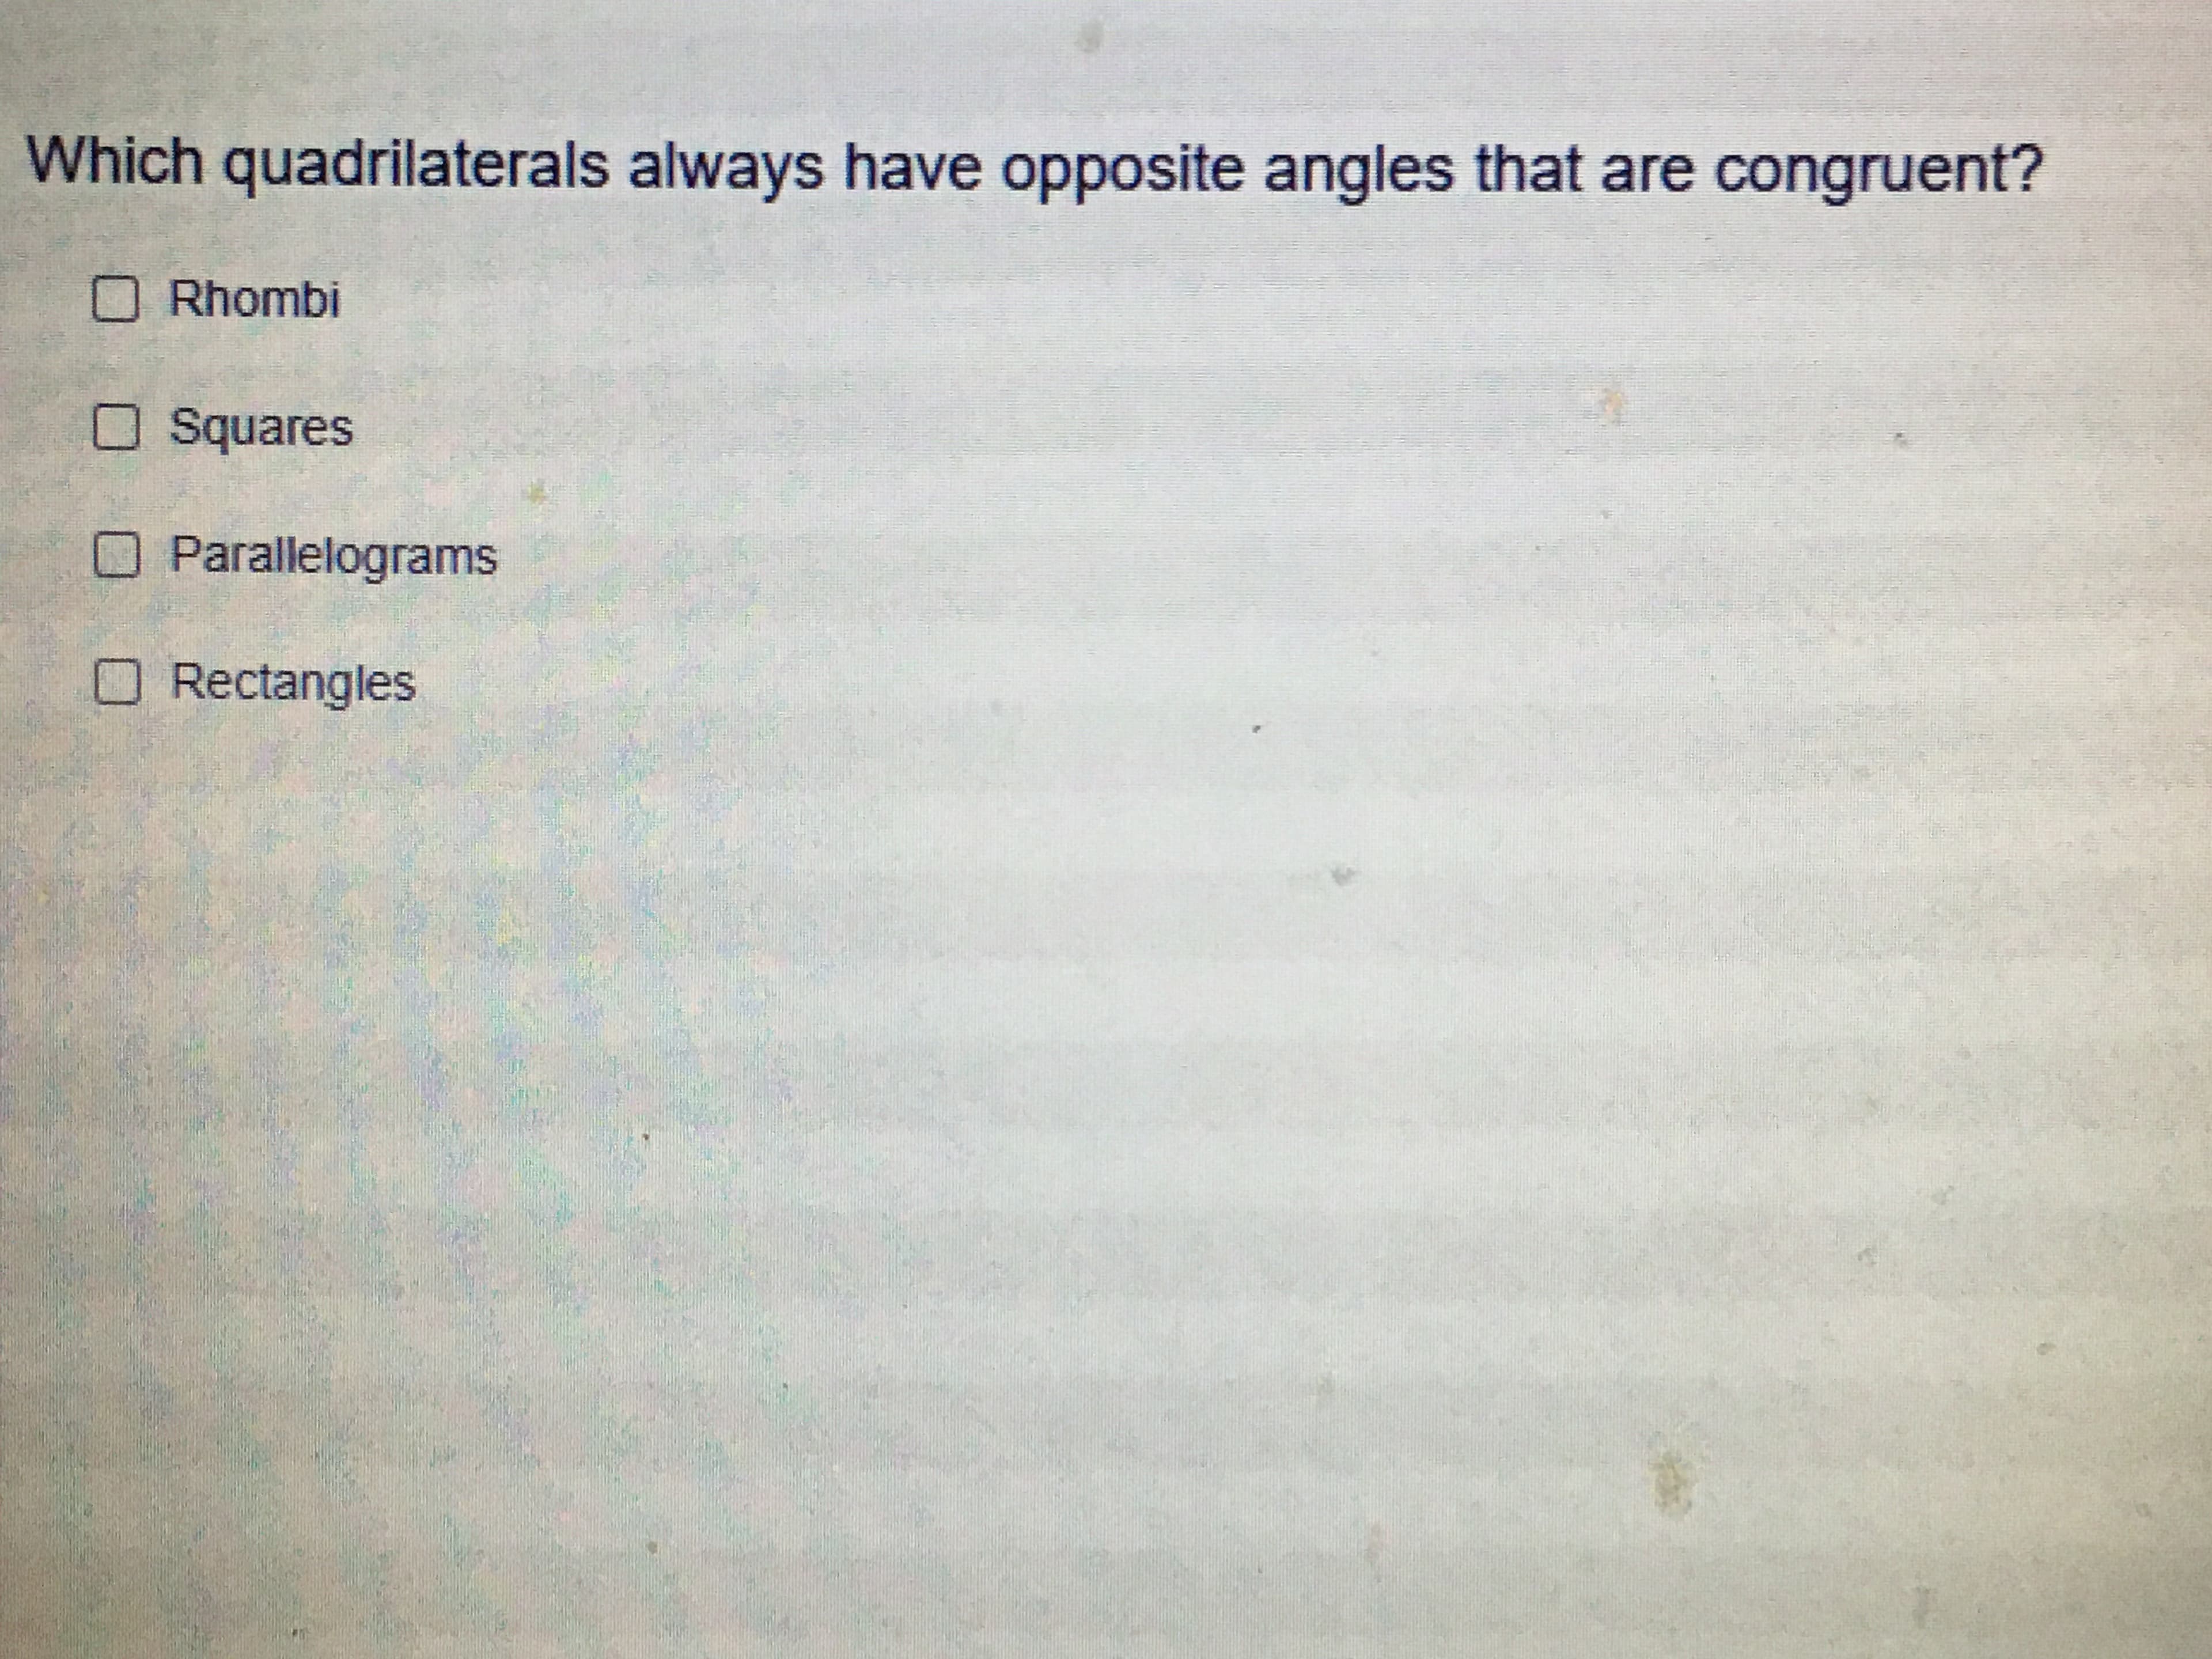 Which quadrilaterals always have opposite angles that are congruent?
